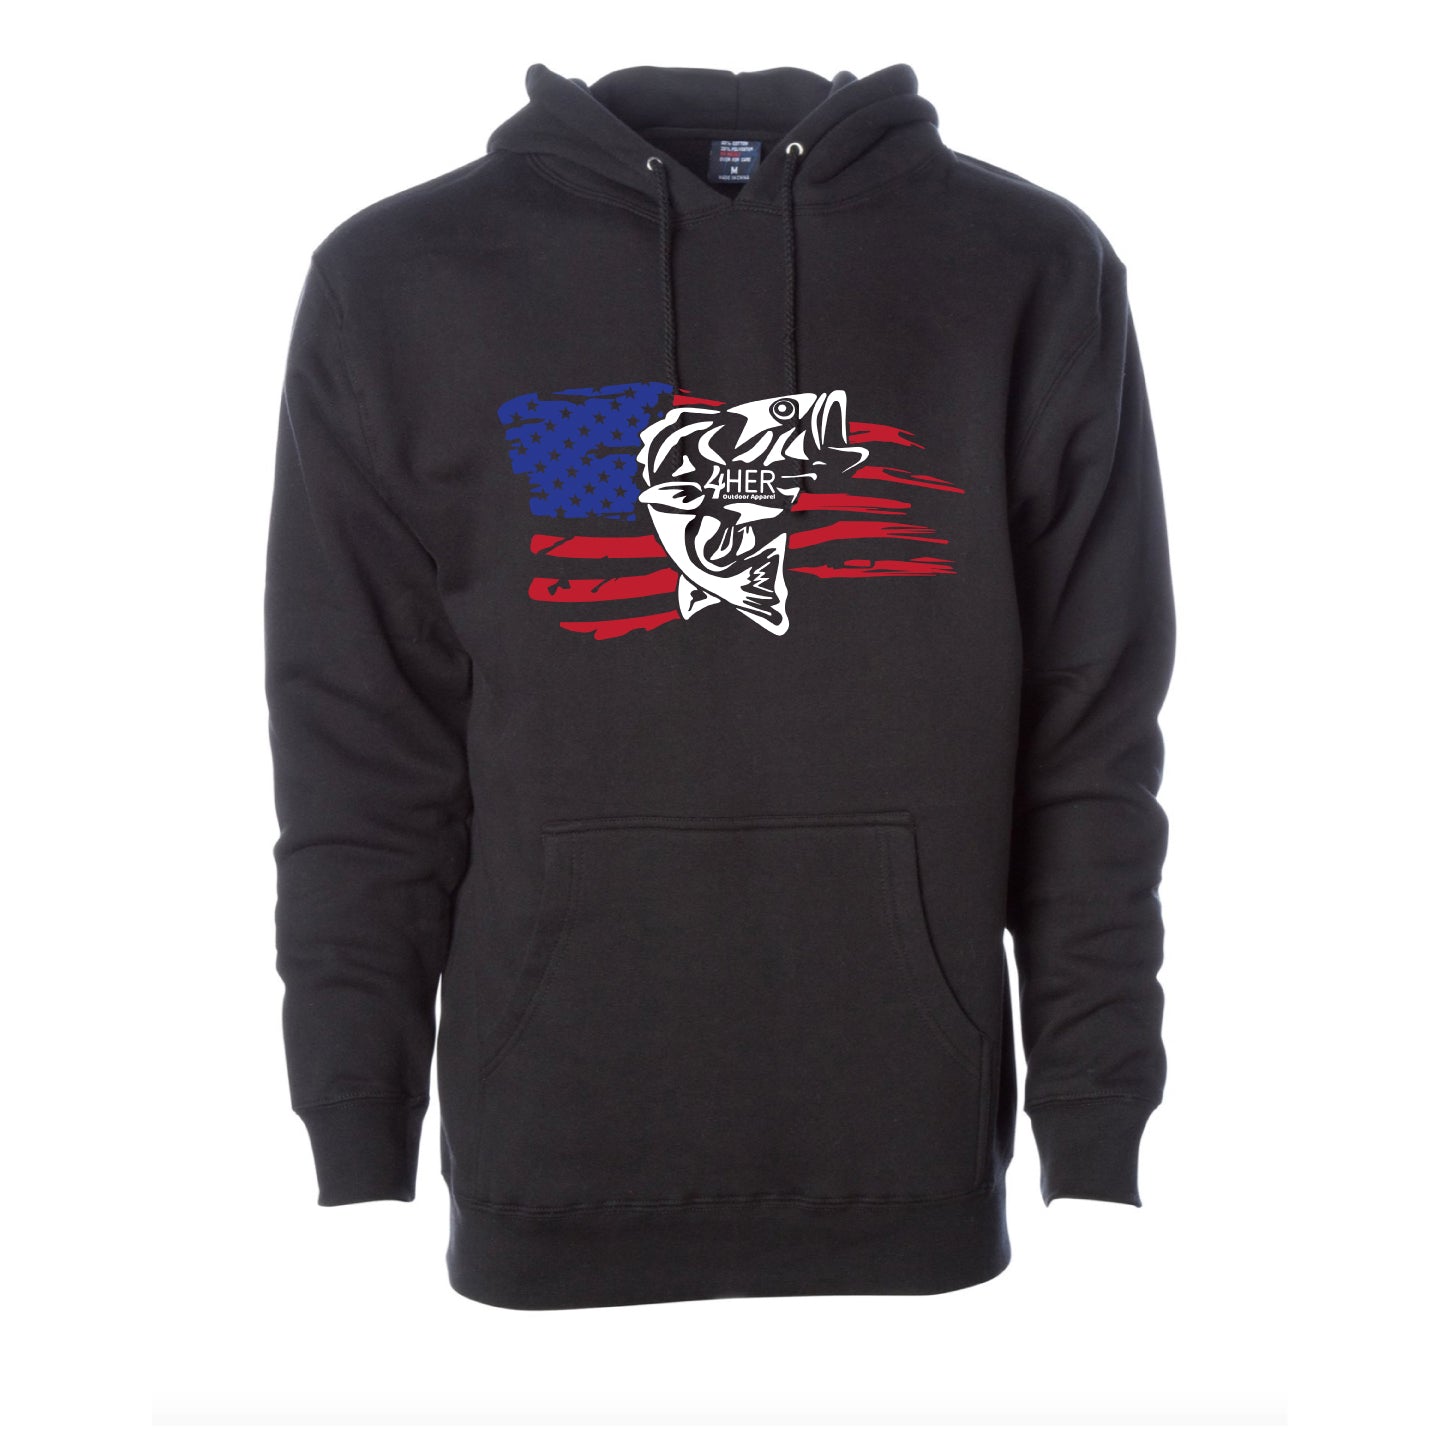 4HER Patriotic Independent Trading Co Pullover Hooded Sweatshirt